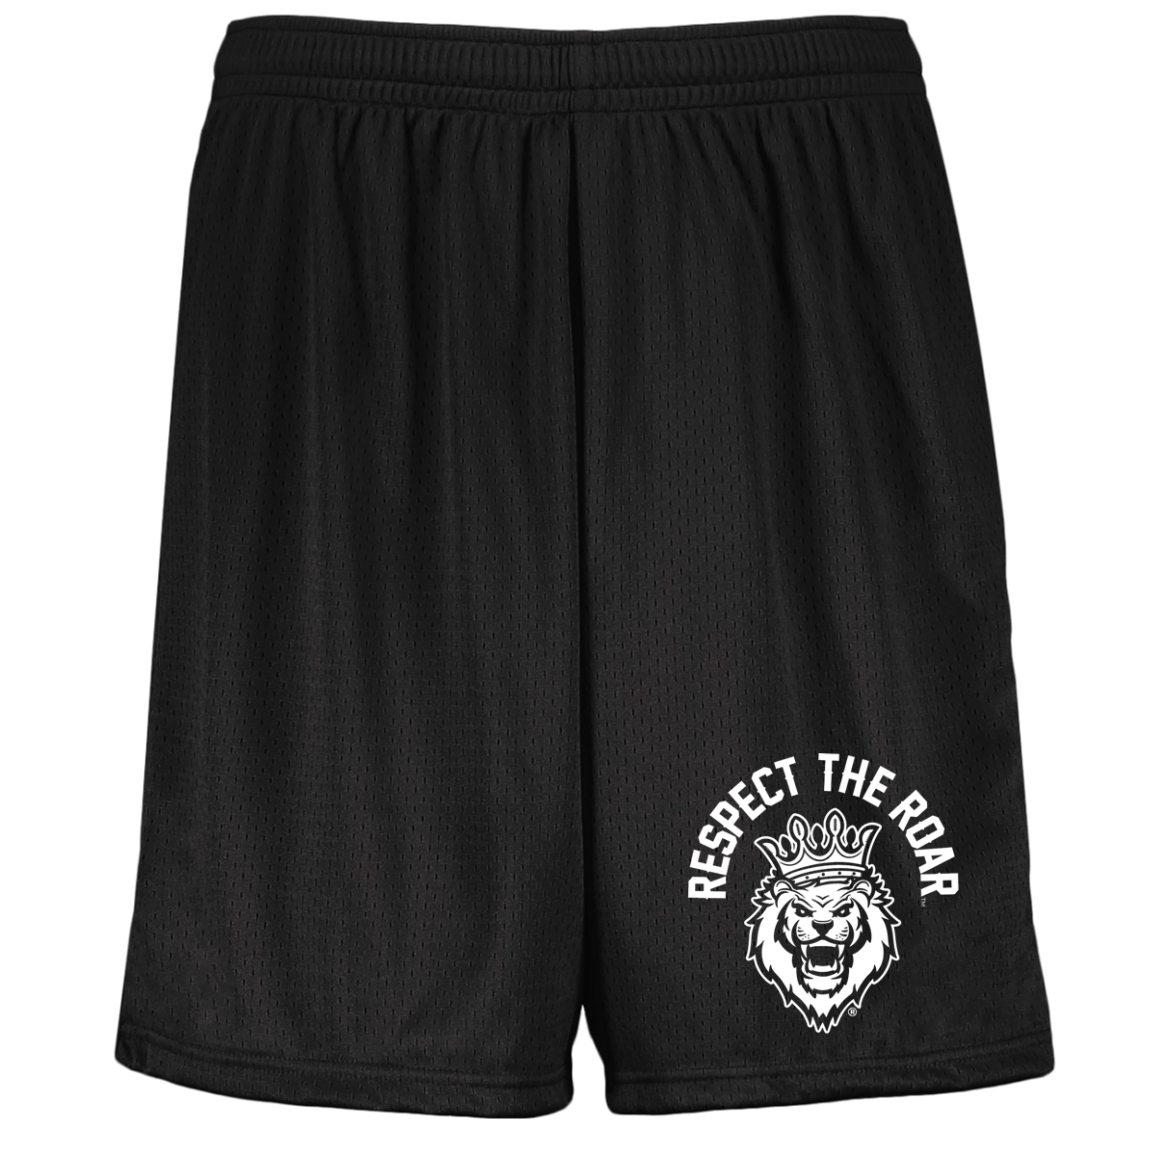 Respect The Roar - 1851 Youth Moisture-Wicking Mesh Shorts